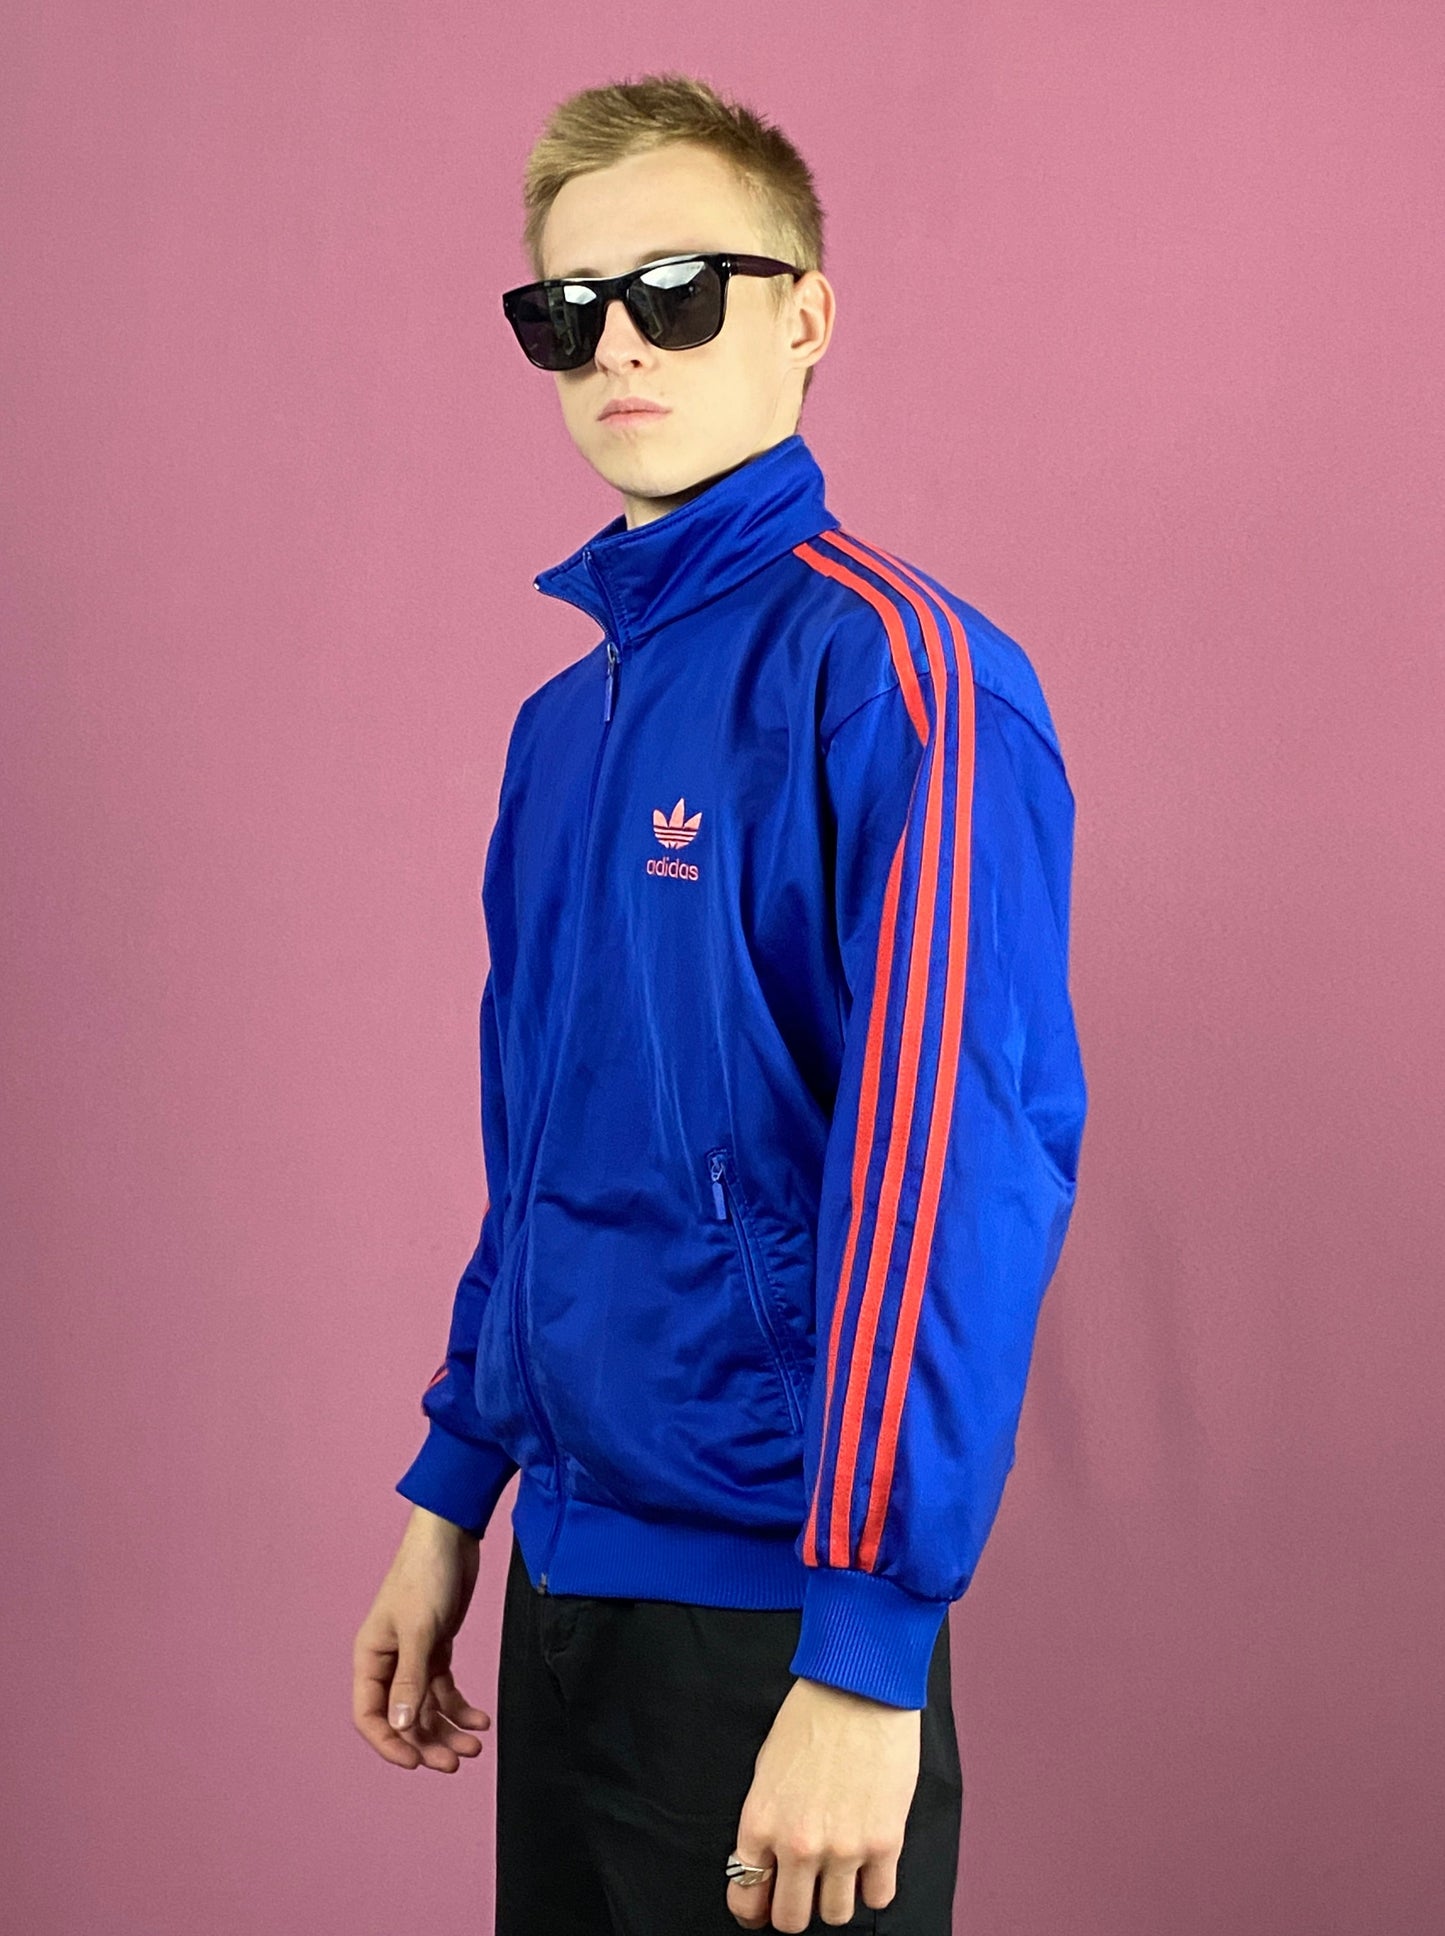 90s Adidas Vintage Men's Track Jacket - Small Blue Polyester